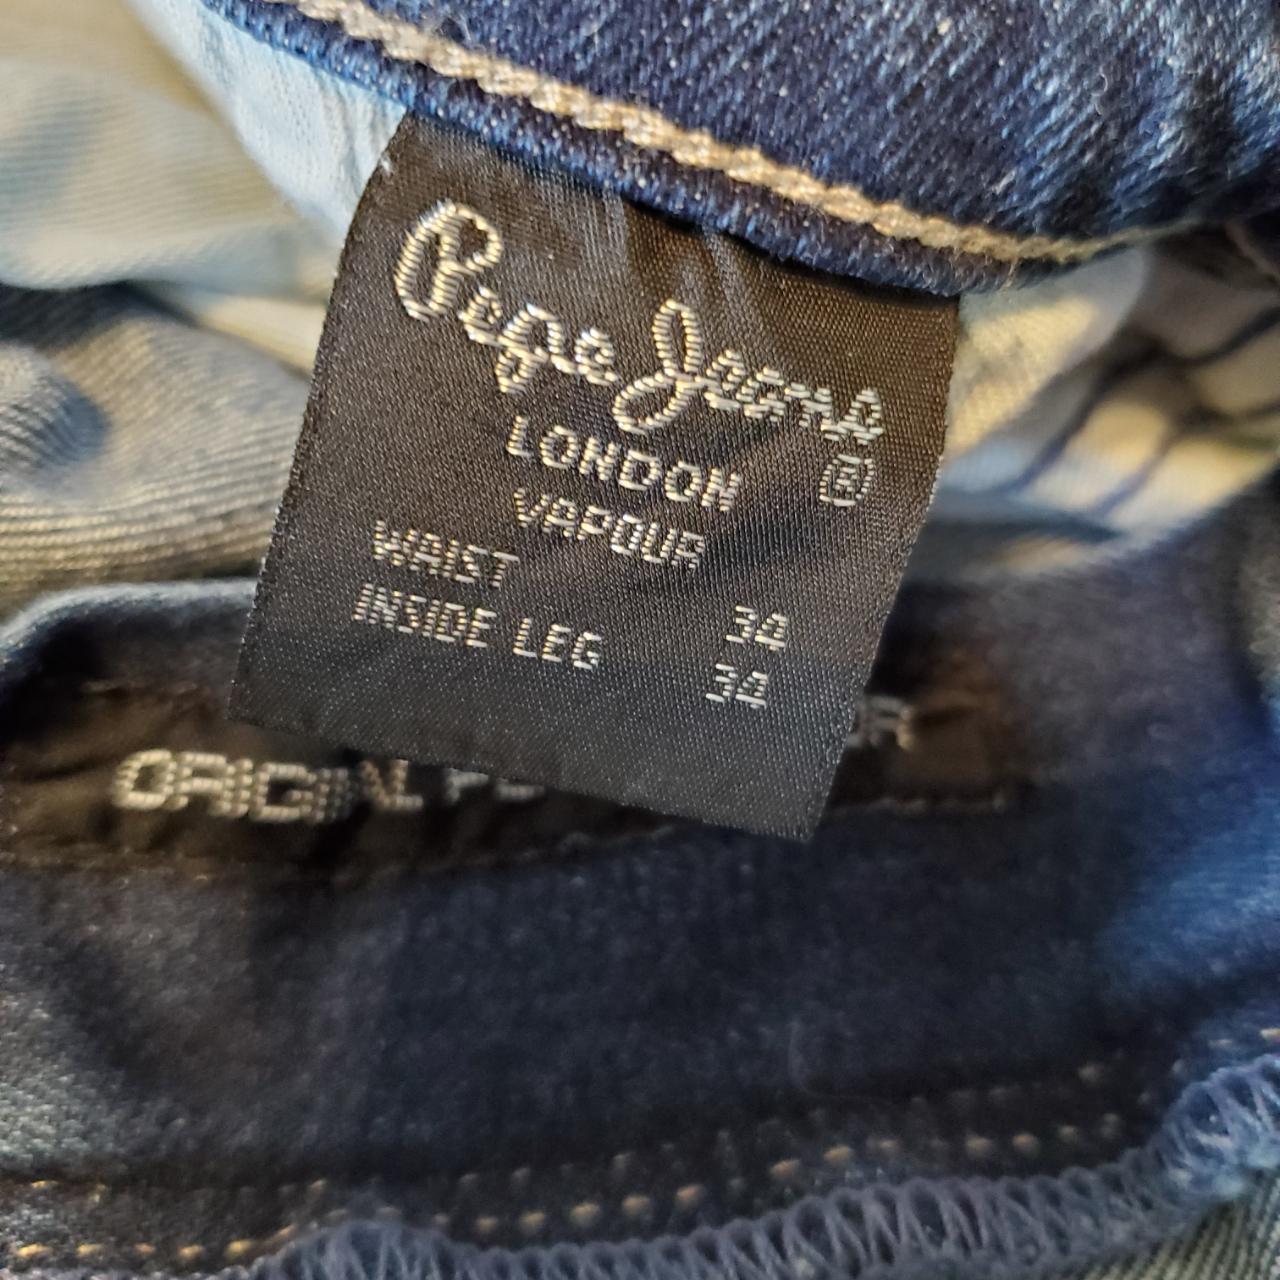 Pepe Jeans Men's Jeans Size 34 Like New Condition - Depop